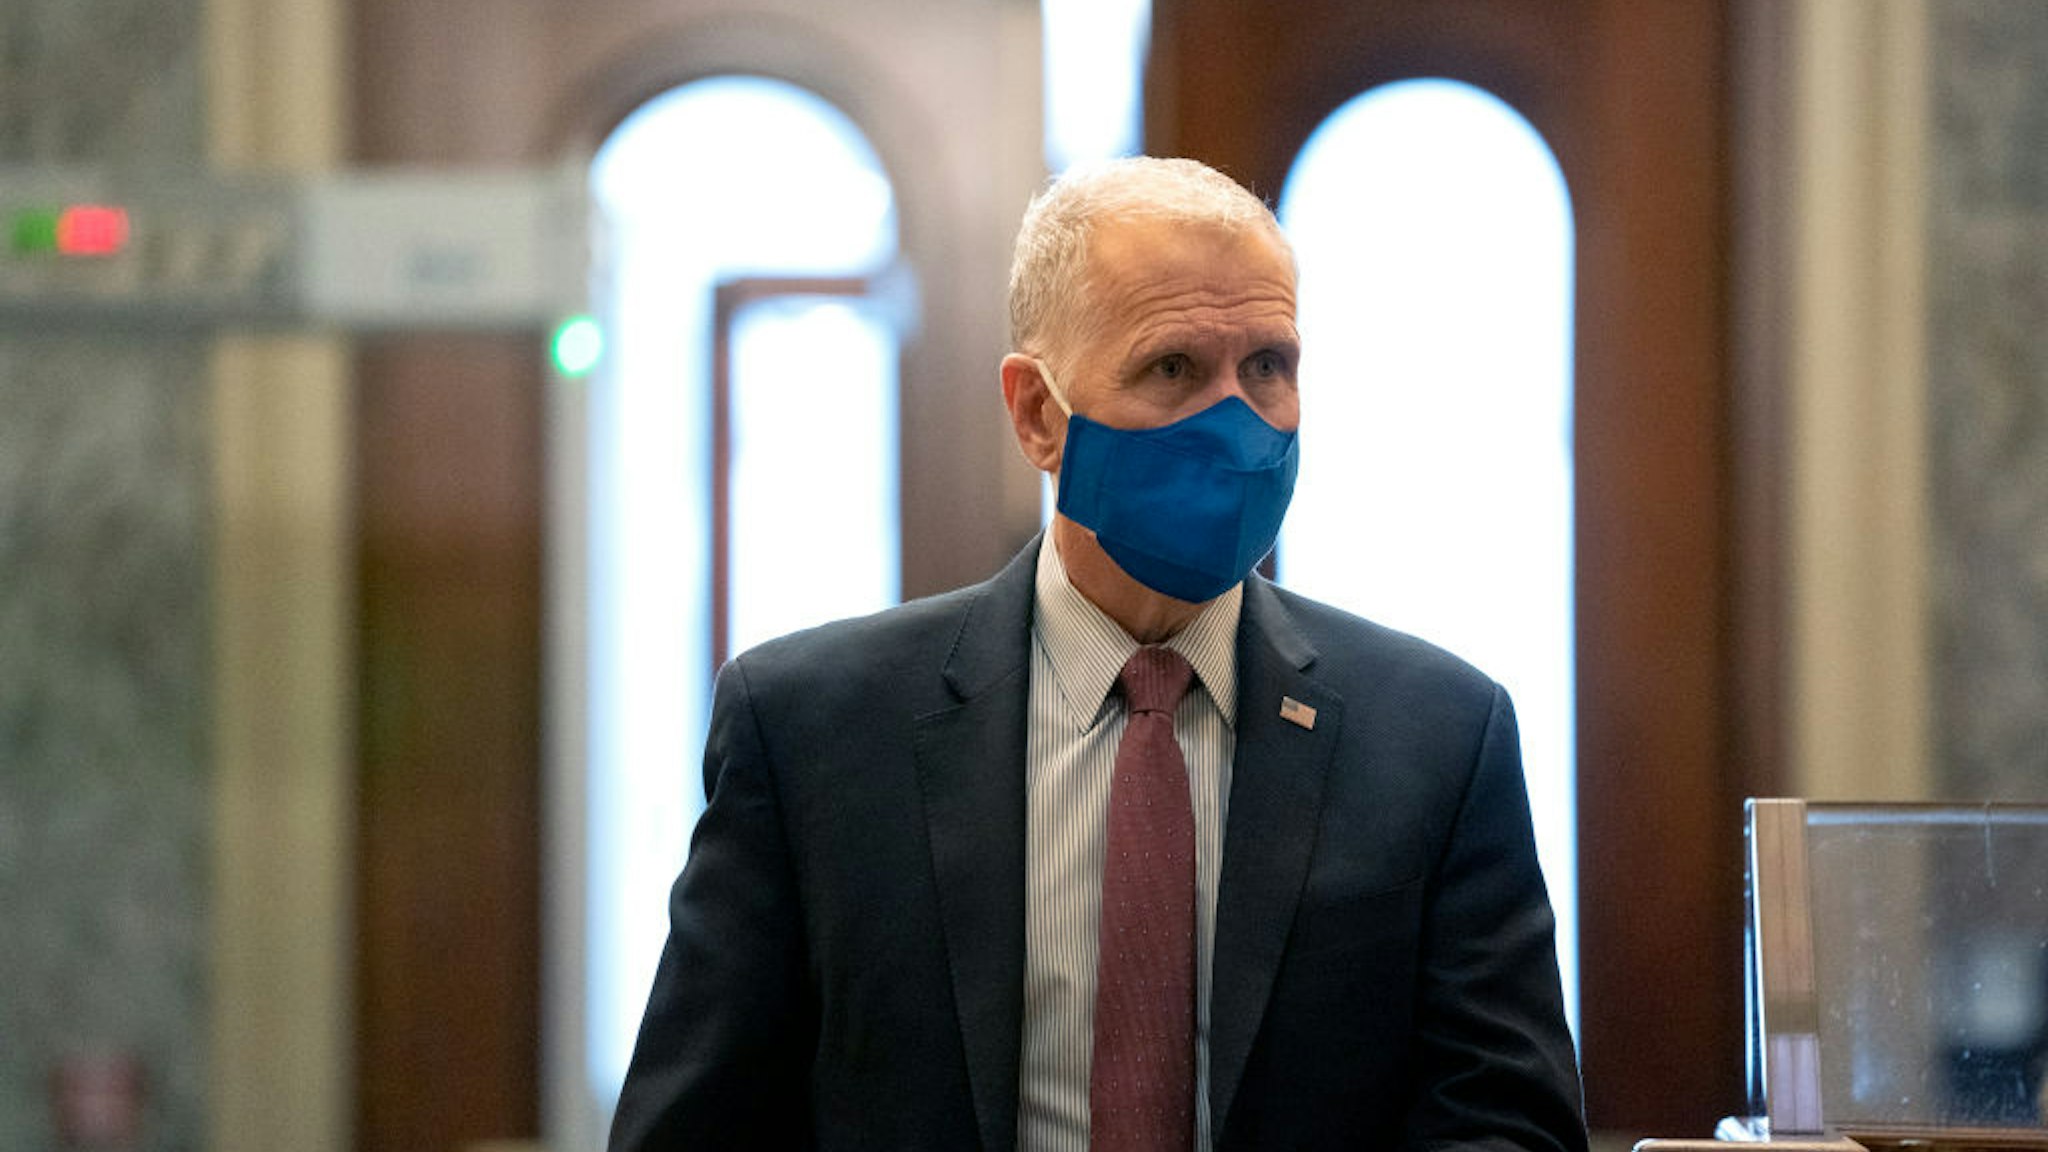 WASHINGTON, DC - DECEMBER 11: U.S. Sen. Thom Tillis (R-NC) wears a protective mask while arriving to the U.S. Capitol on December 11, 2020 in Washington, DC. Lawmakers are facing a midnight deadline to pass a continuing resolution to avert a partial shutdown and fund the government for another week.